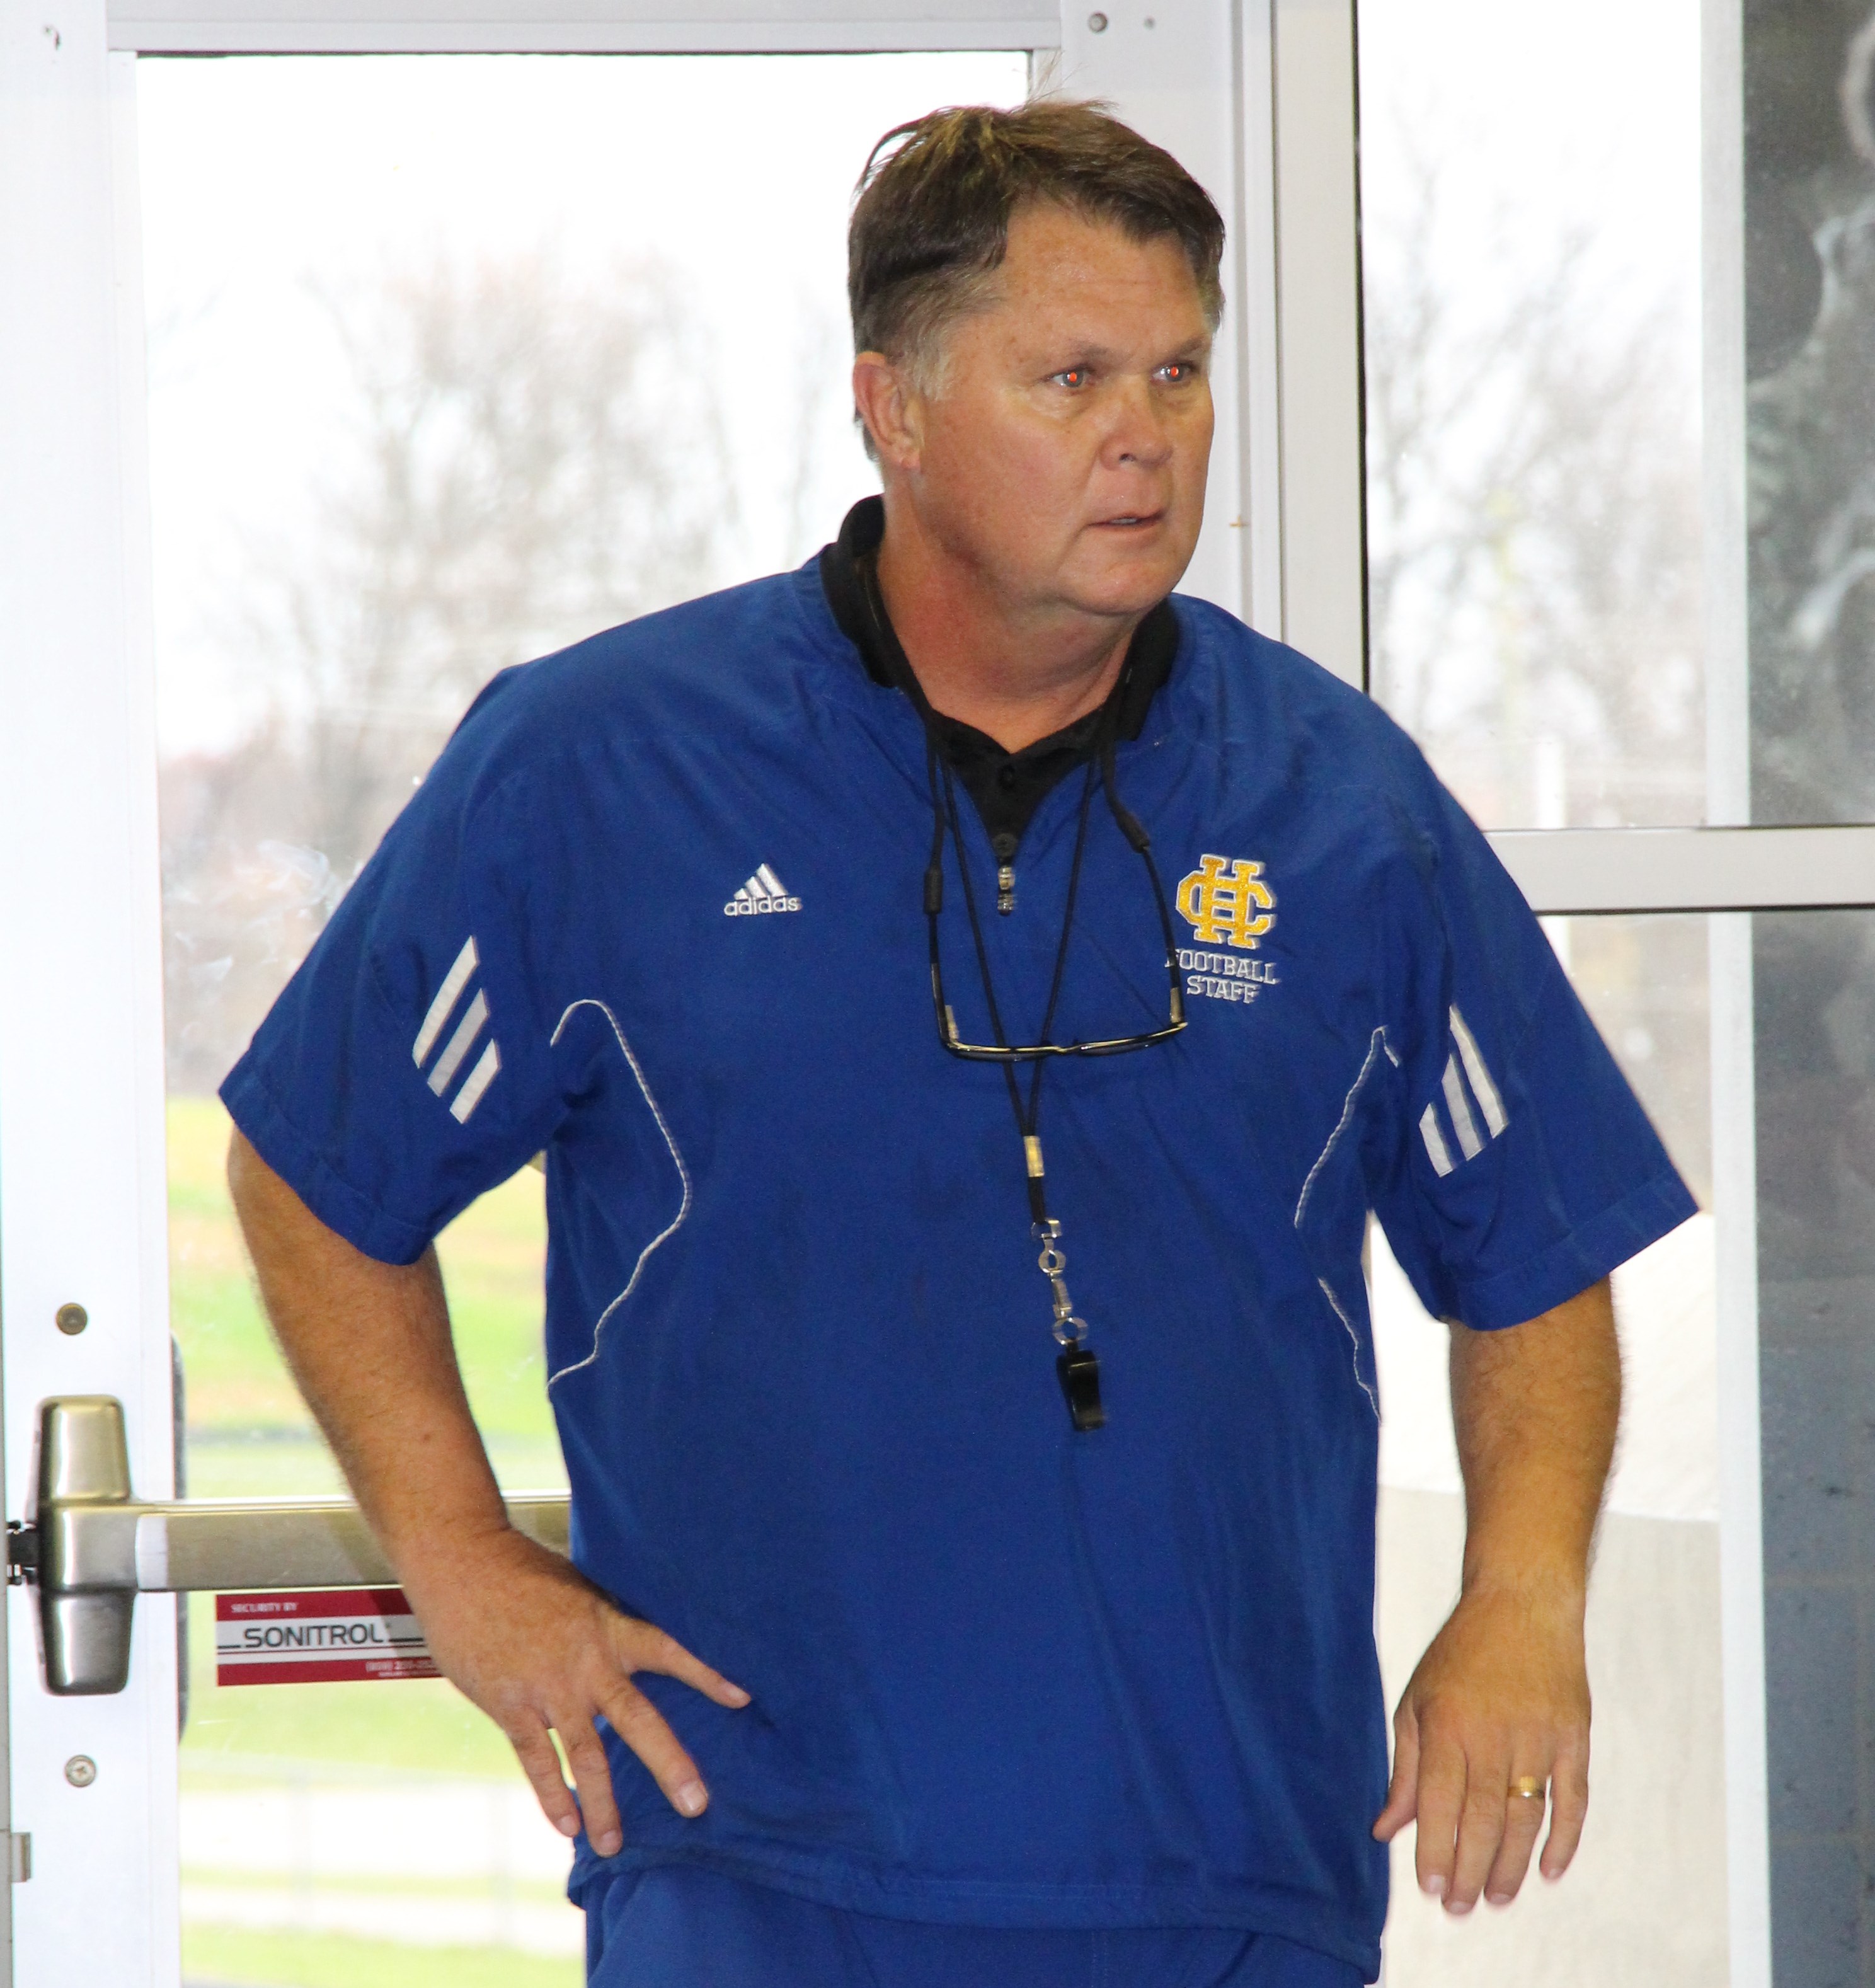 Sam Simpson, the football coach and a health and physical education teacher at Henry Clay High School (Fayette County), has been named a recipient of the Caring Coach of the Year award presented by Dove Men+Care Deodorant and the College Football Hall of Fame. Photo submitted